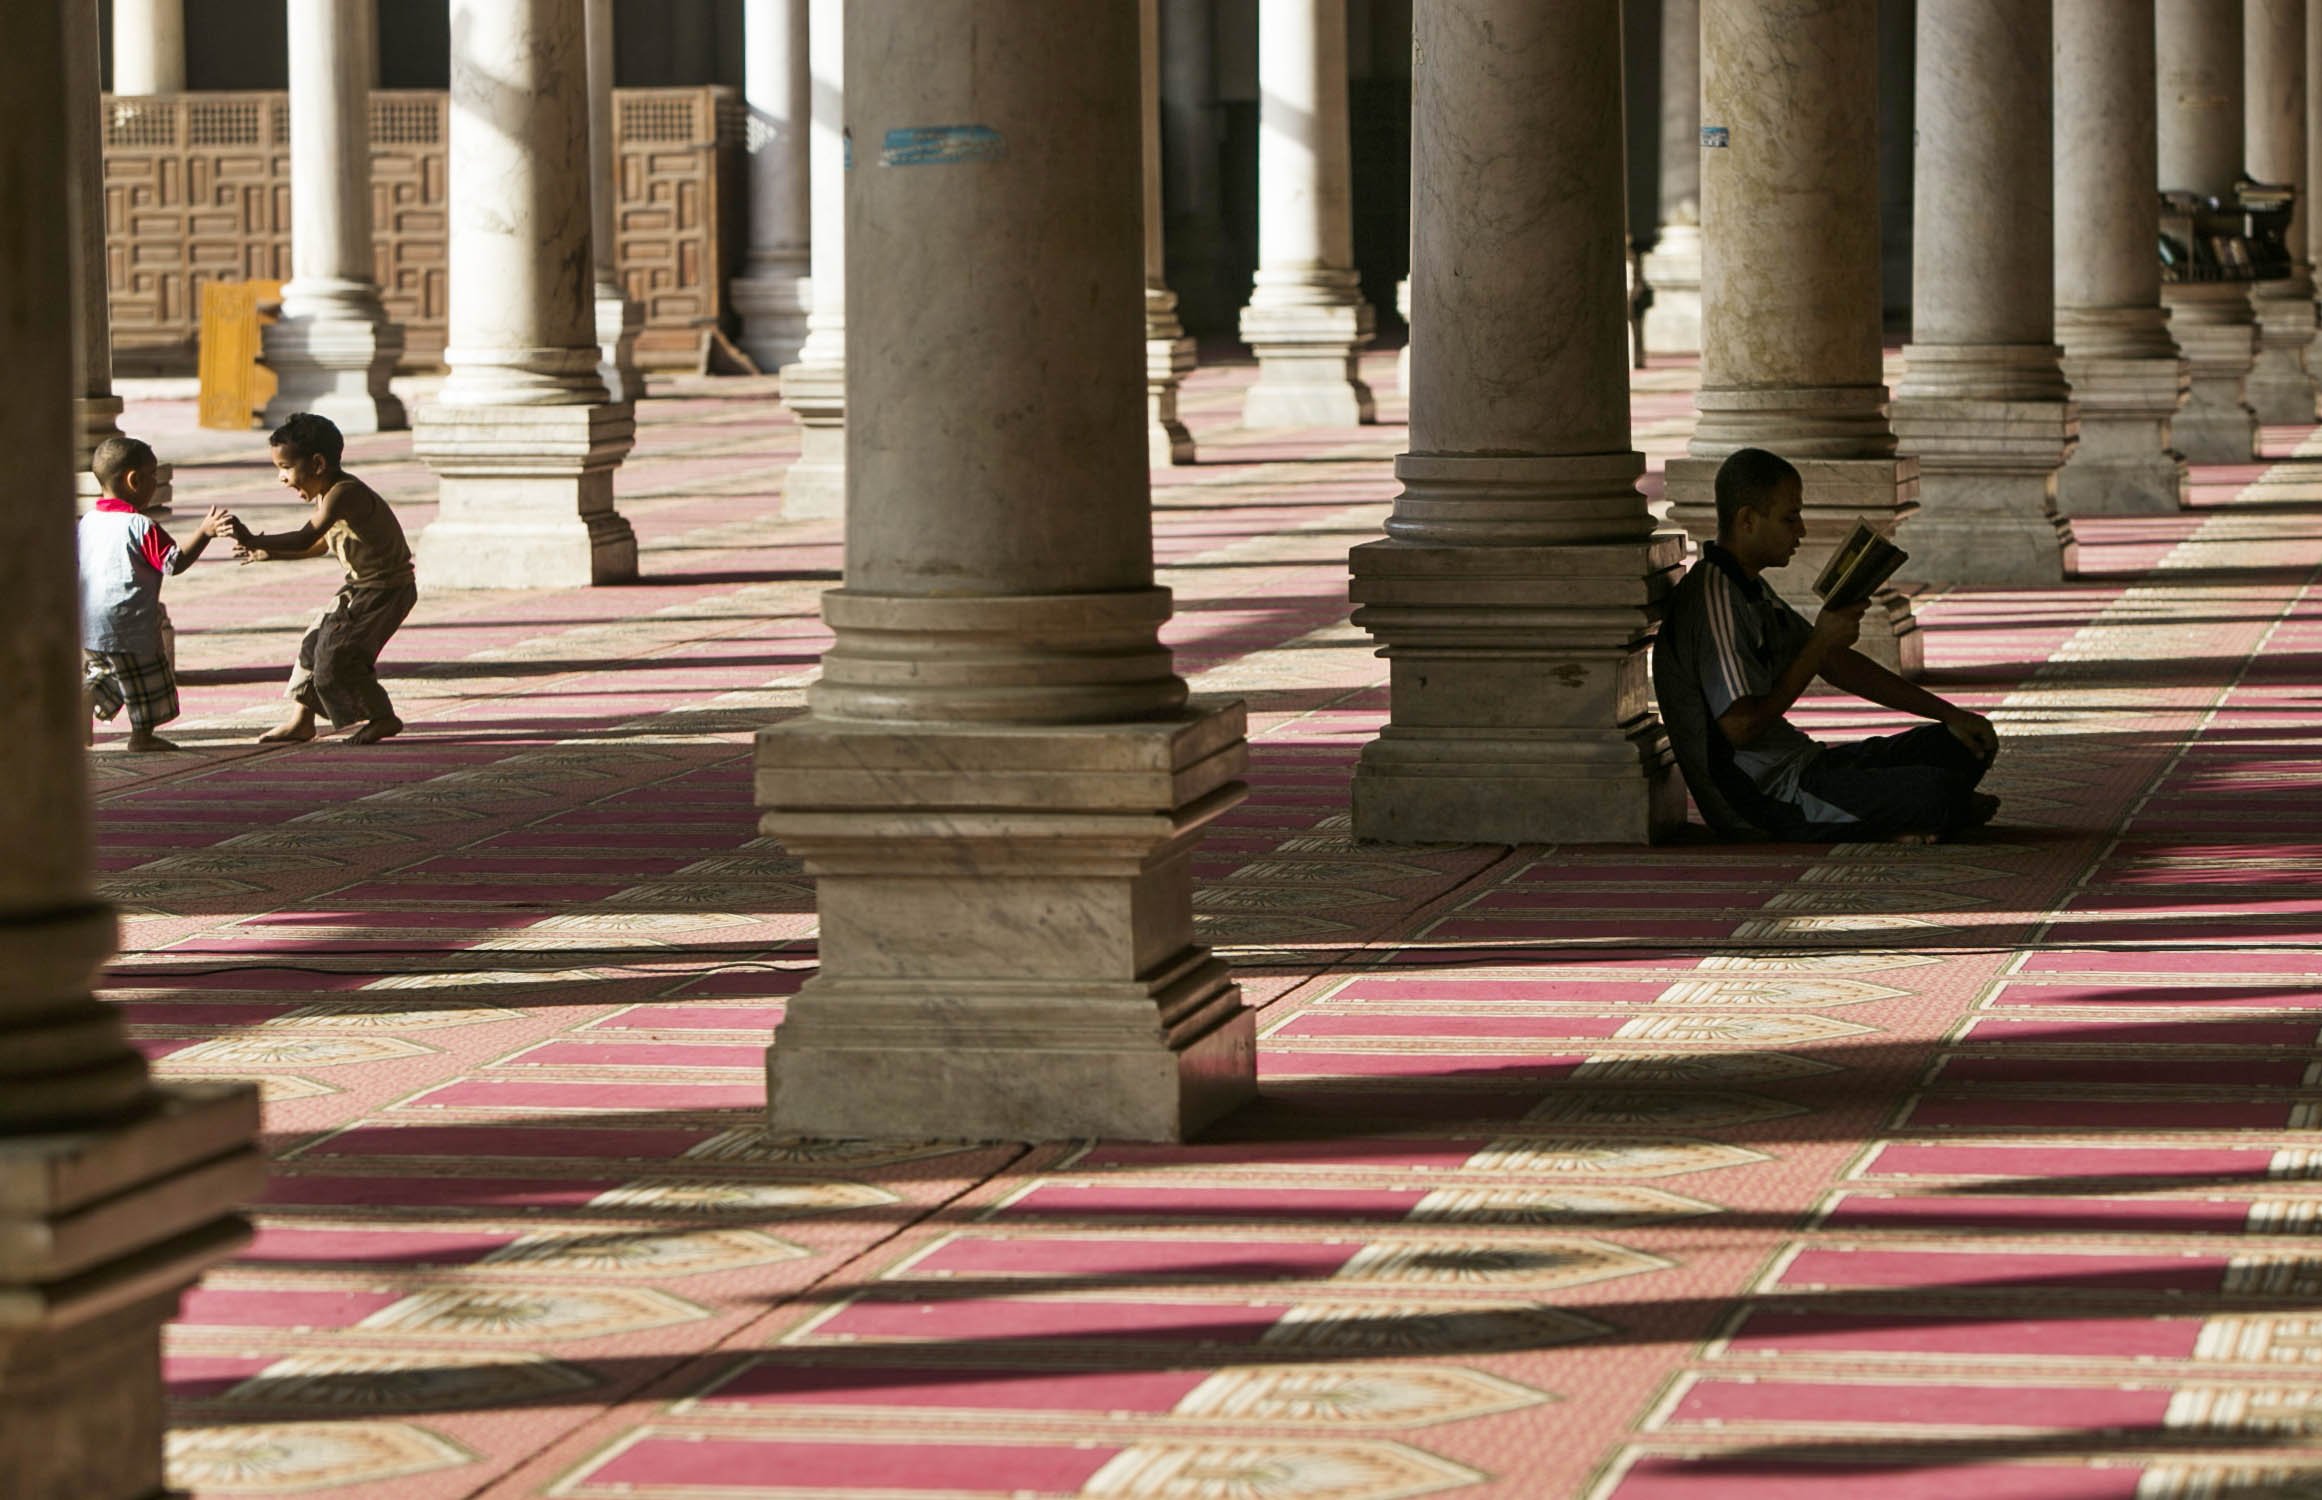 Egyptian children have fun inside a mosque during their fasting hours in a Ramadan afternoon in Cairo June 23, 2014. (Cui Xinyu—Xinhua Press/Corbis)